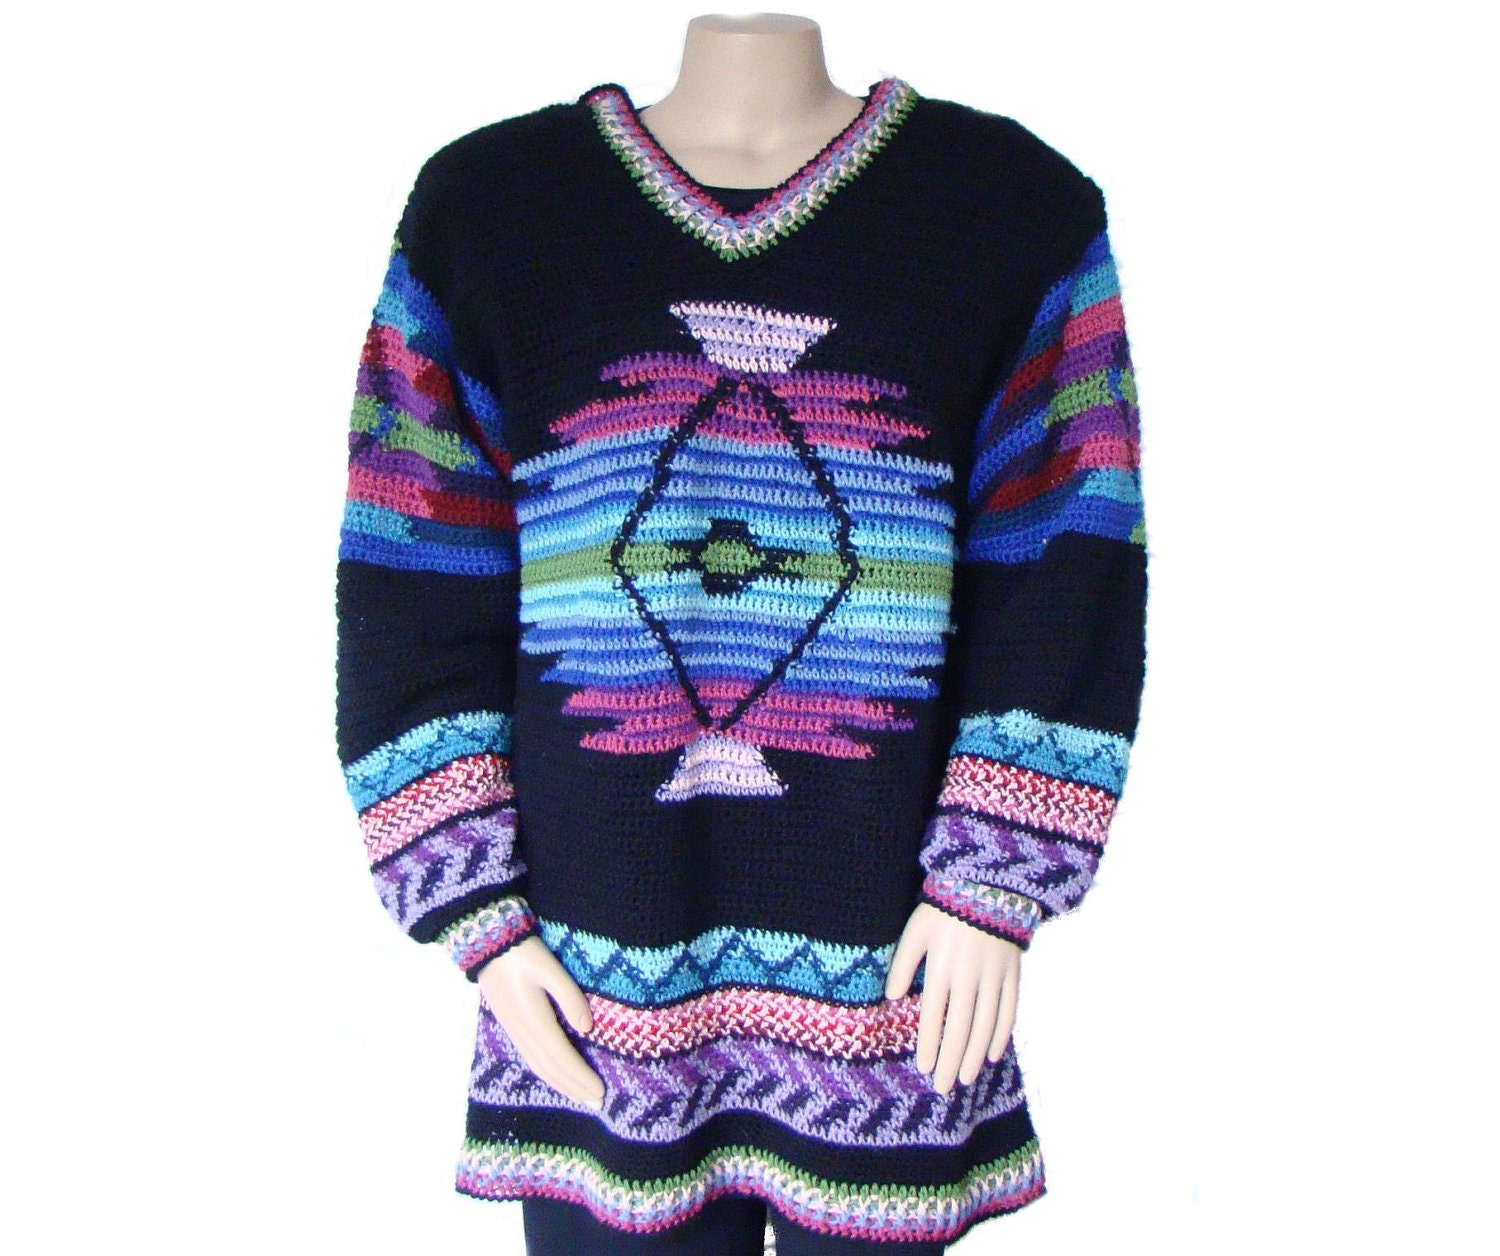 Size 1X Sweater from MirabilisFashions